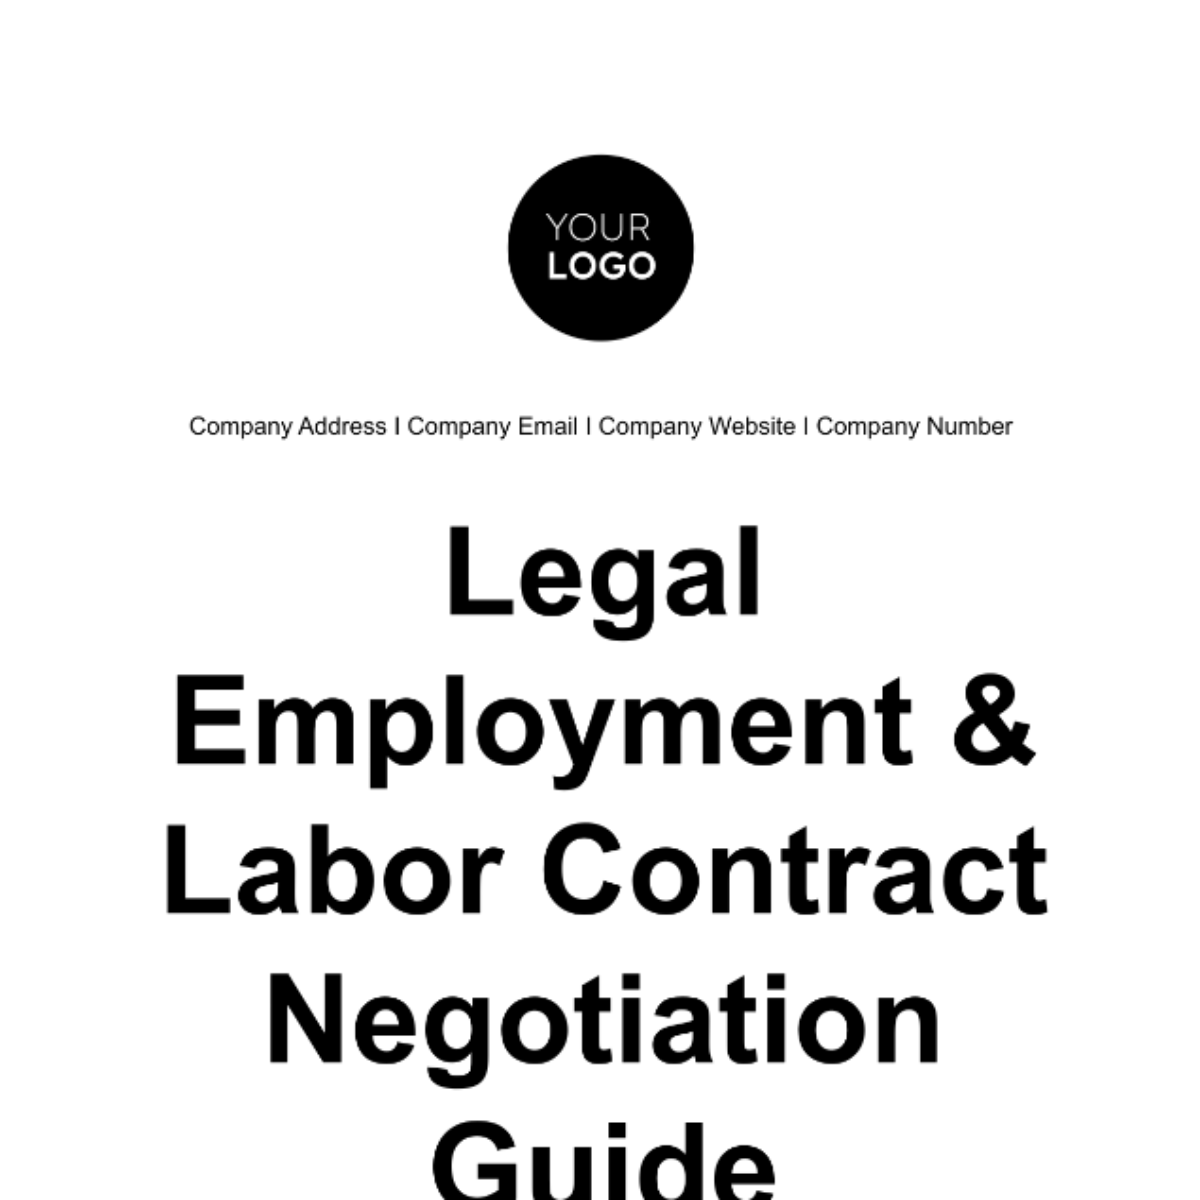 Legal Employment & Labor Contract Negotiation Guide Template